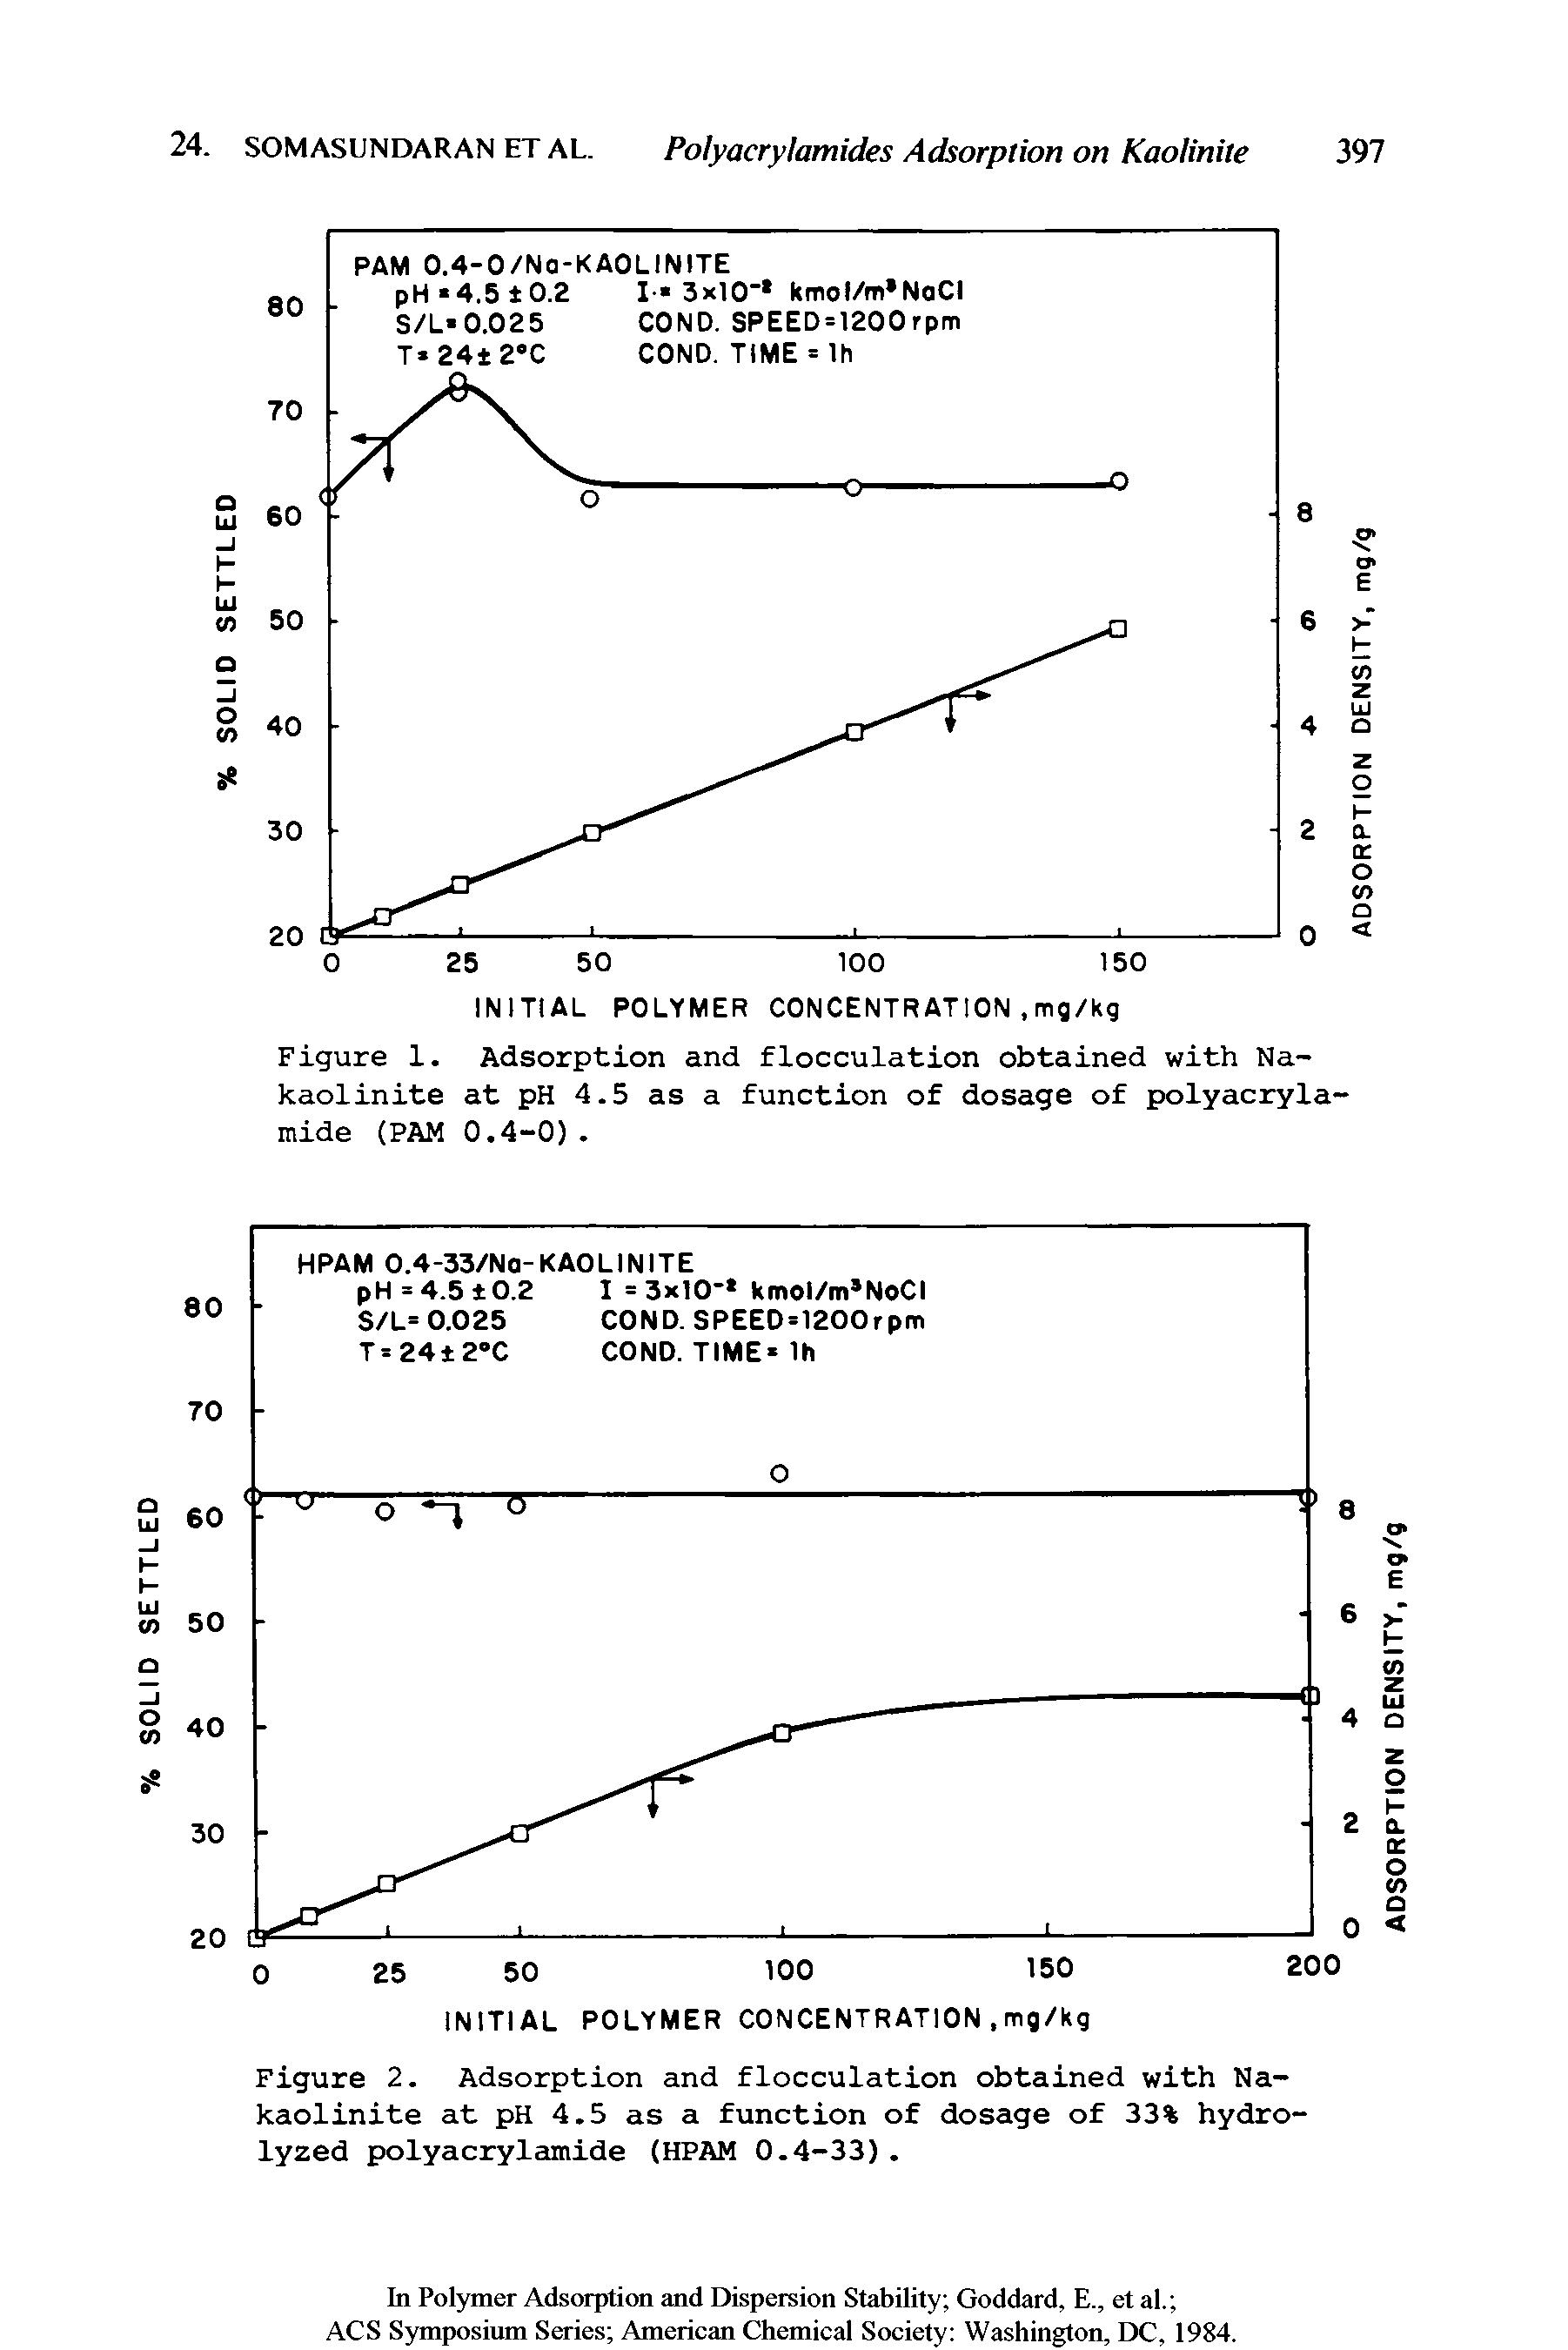 Figure 2. Adsorption and flocculation obtained with Na-kaolinite at pH 4.5 as a function of dosage of 33% hydrolyzed polyacrylamide (HPAM 0.4-33).